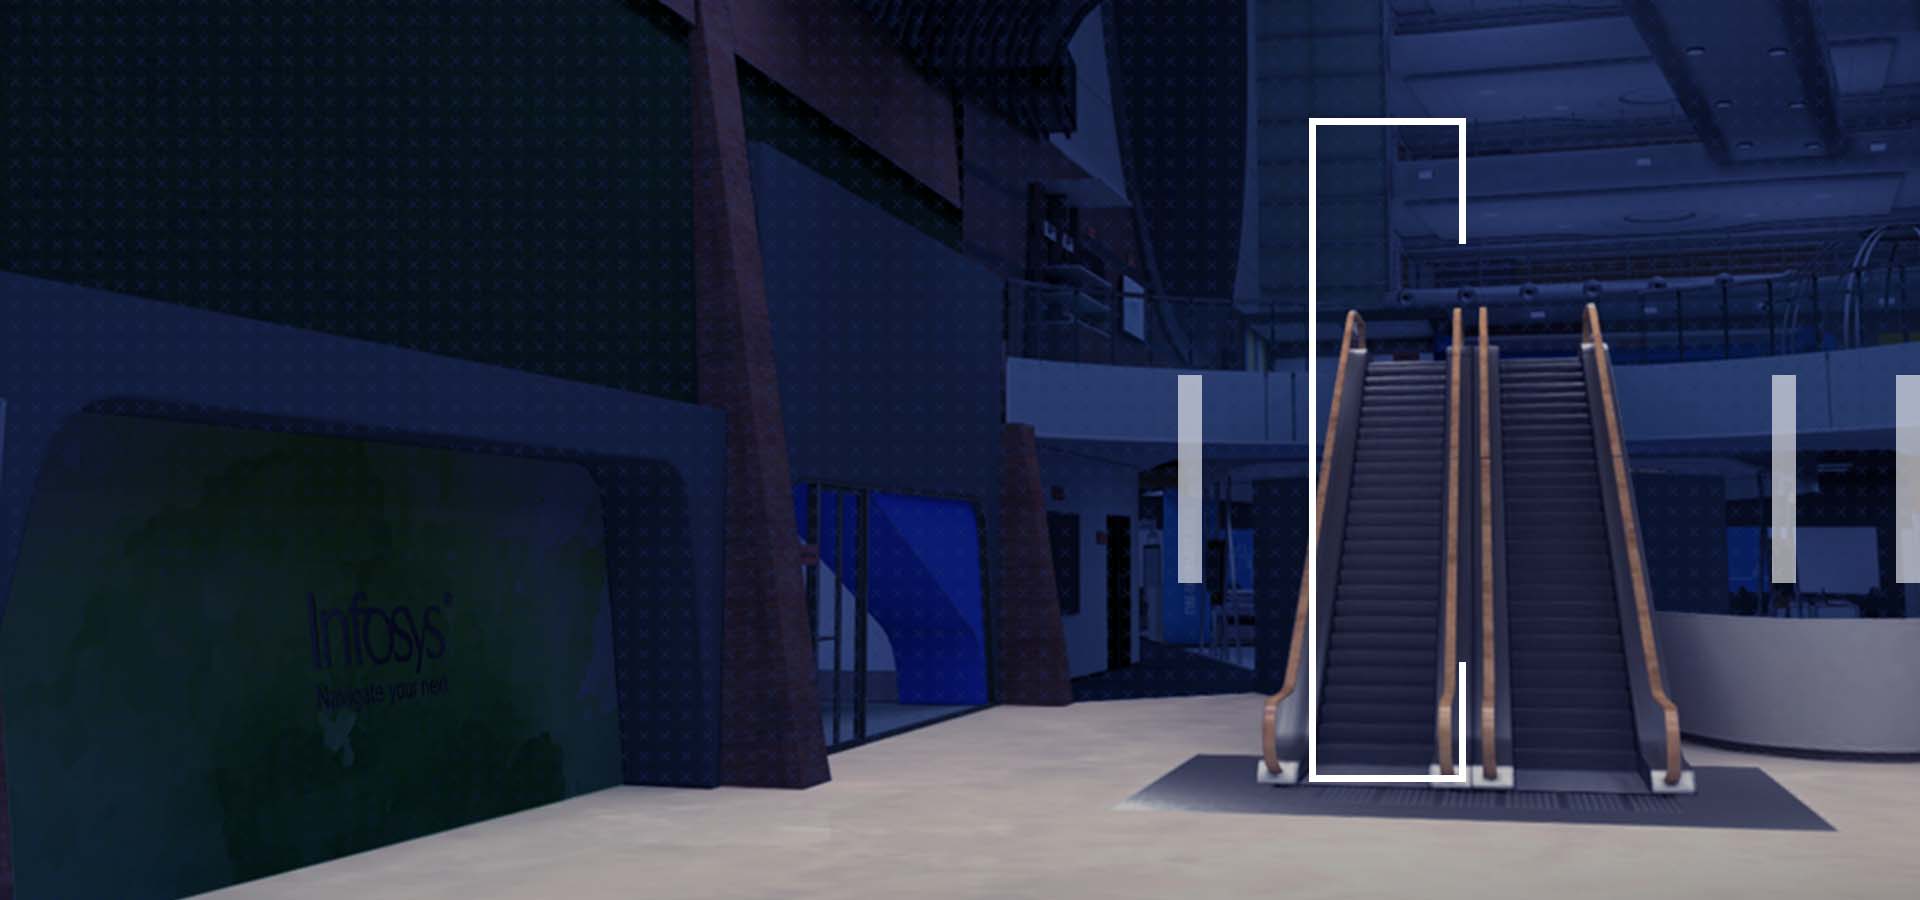 Virtual Living Labs (VLL) is an Immersive World Showcasing the Next Innovation